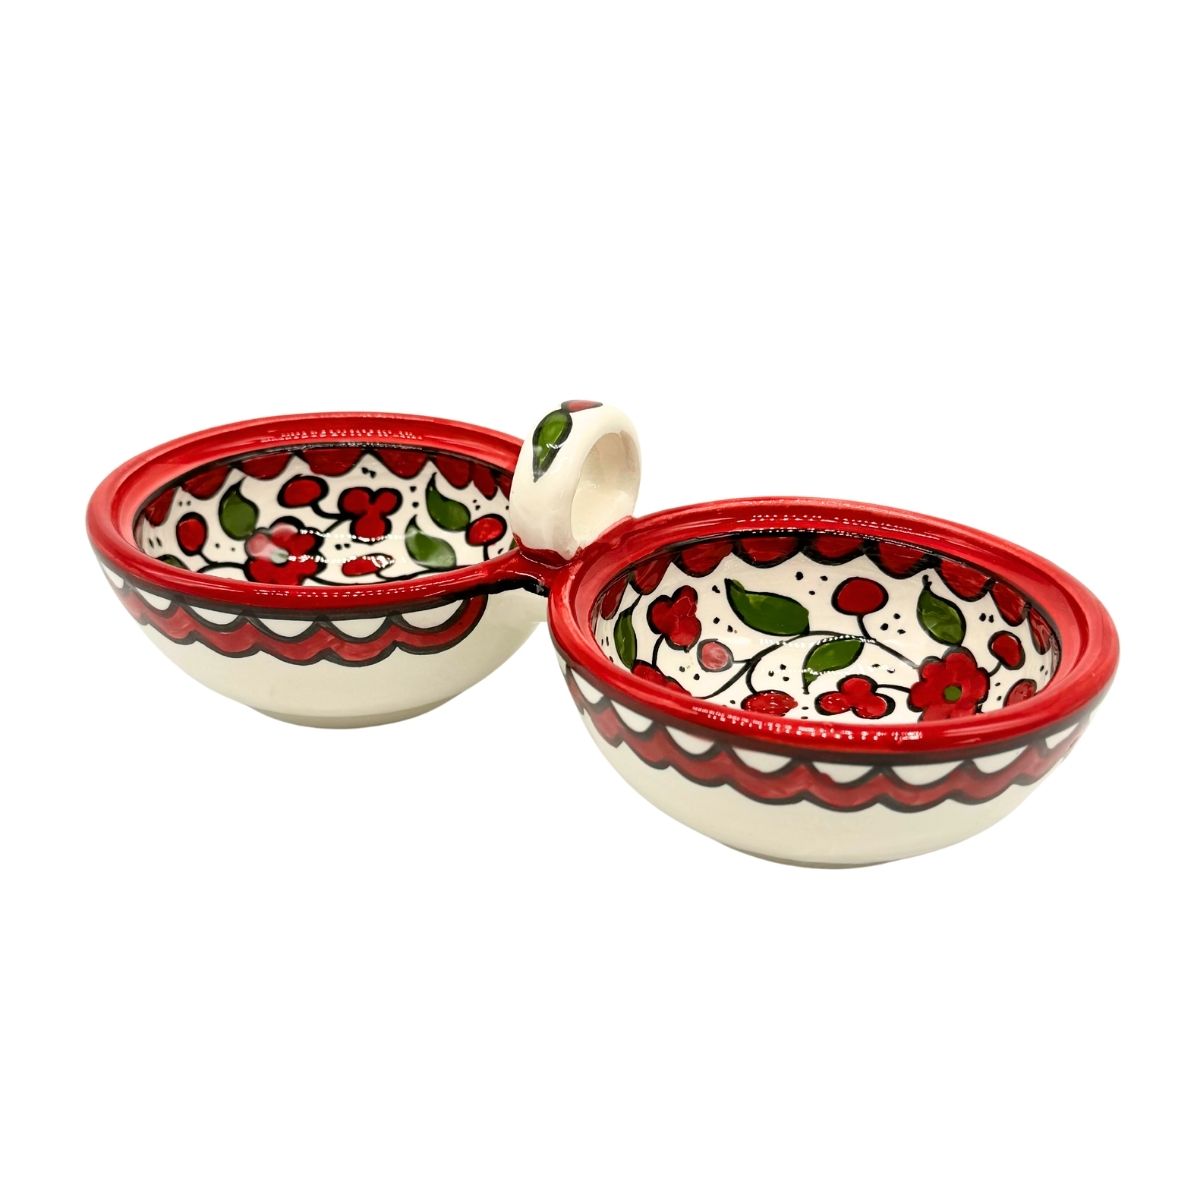 Zeit and Za'atar Serving Bowl - Red and Green